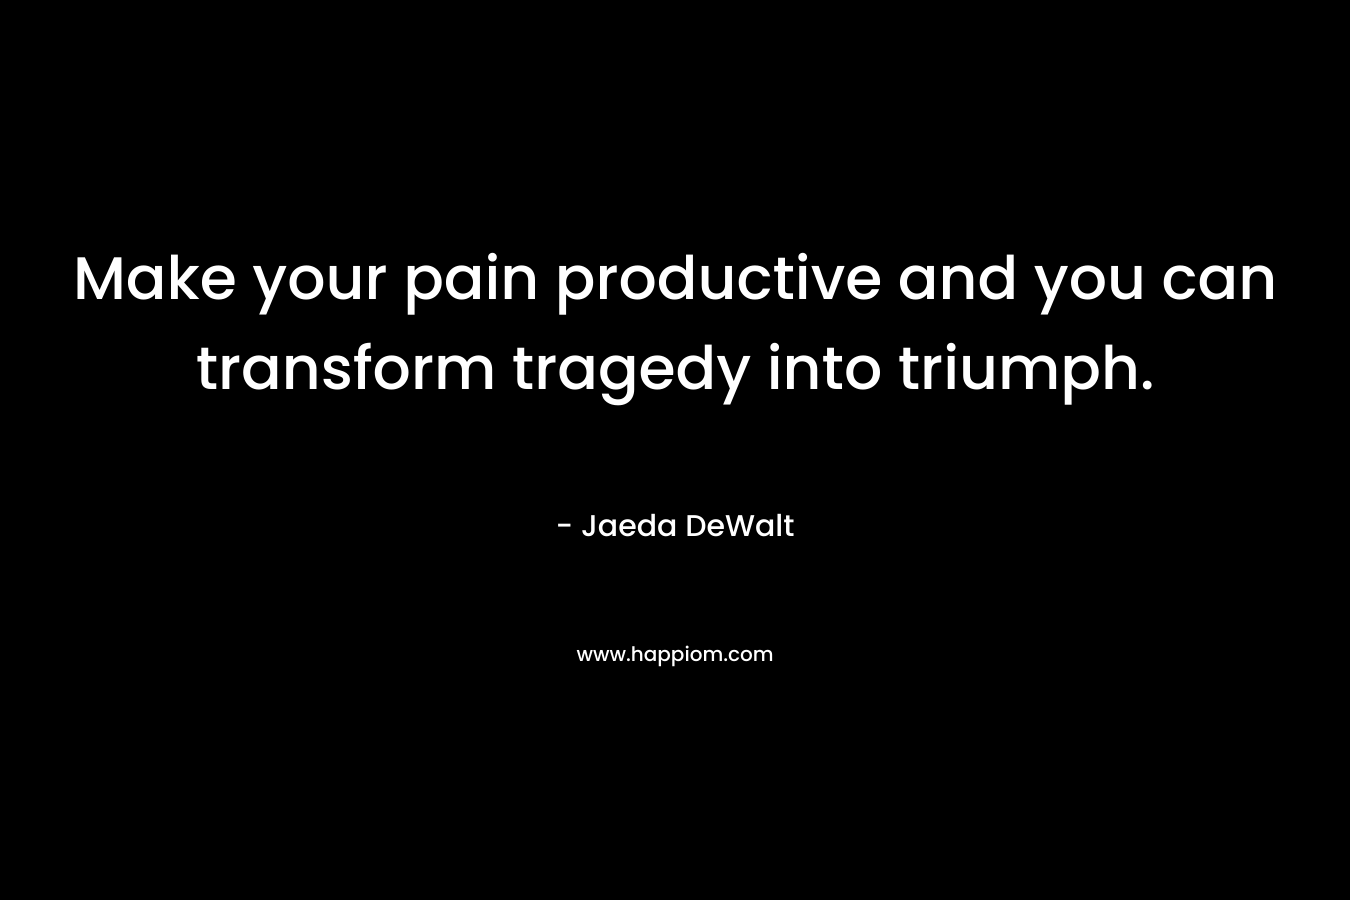 Make your pain productive and you can transform tragedy into triumph.